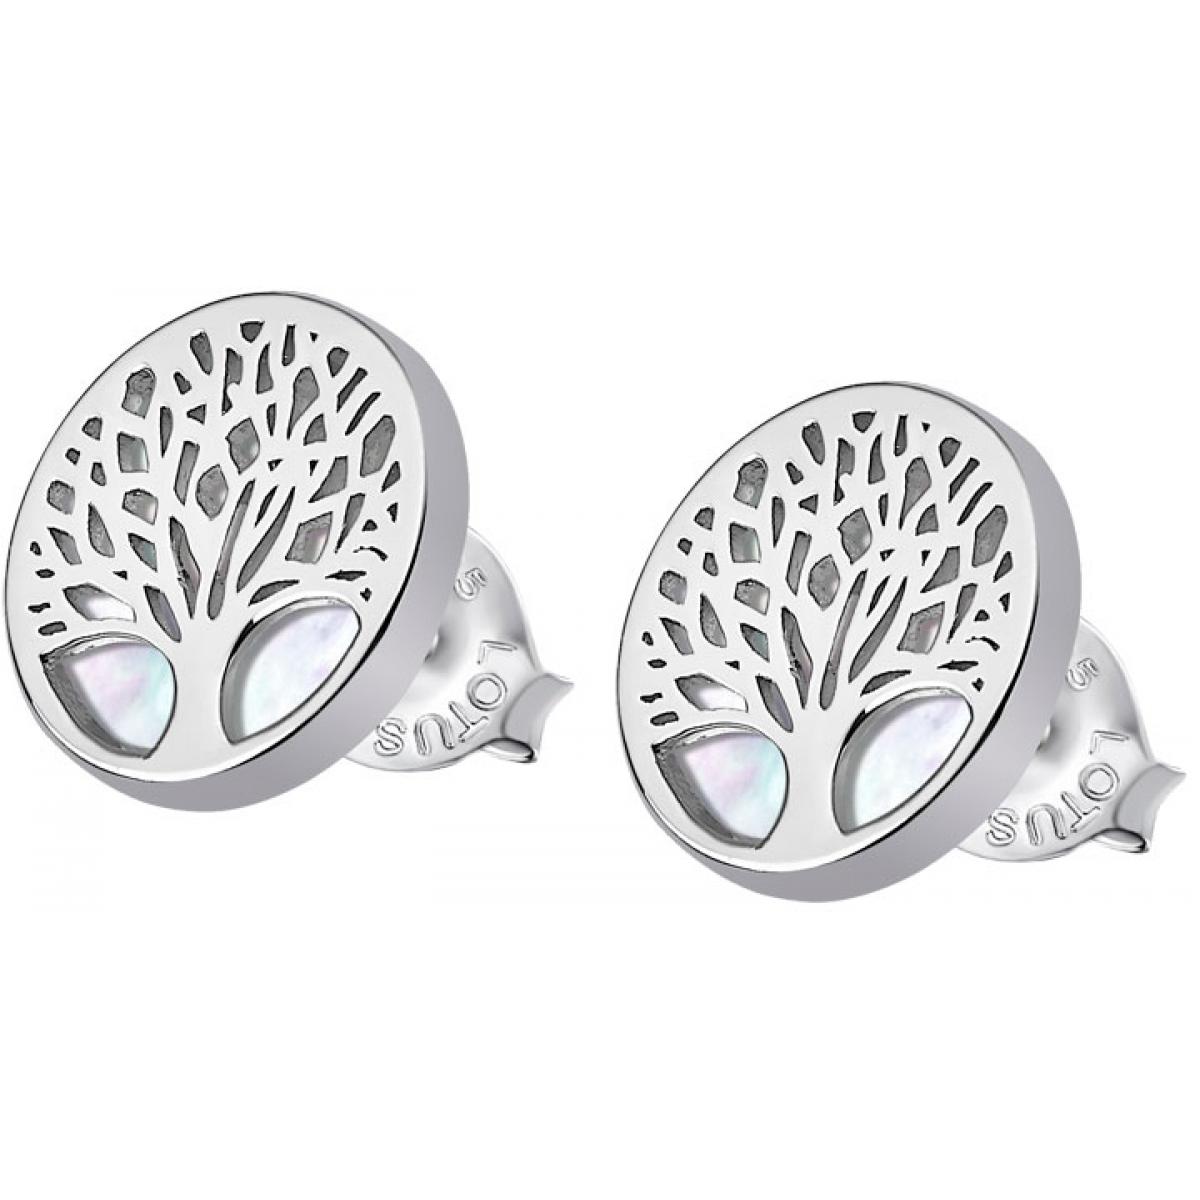 Boucles d'oreilles Lotus Silver TREE OF LIFE LP1678-4-1 - Boucles d'oreilles TREE OF LIFE Argent